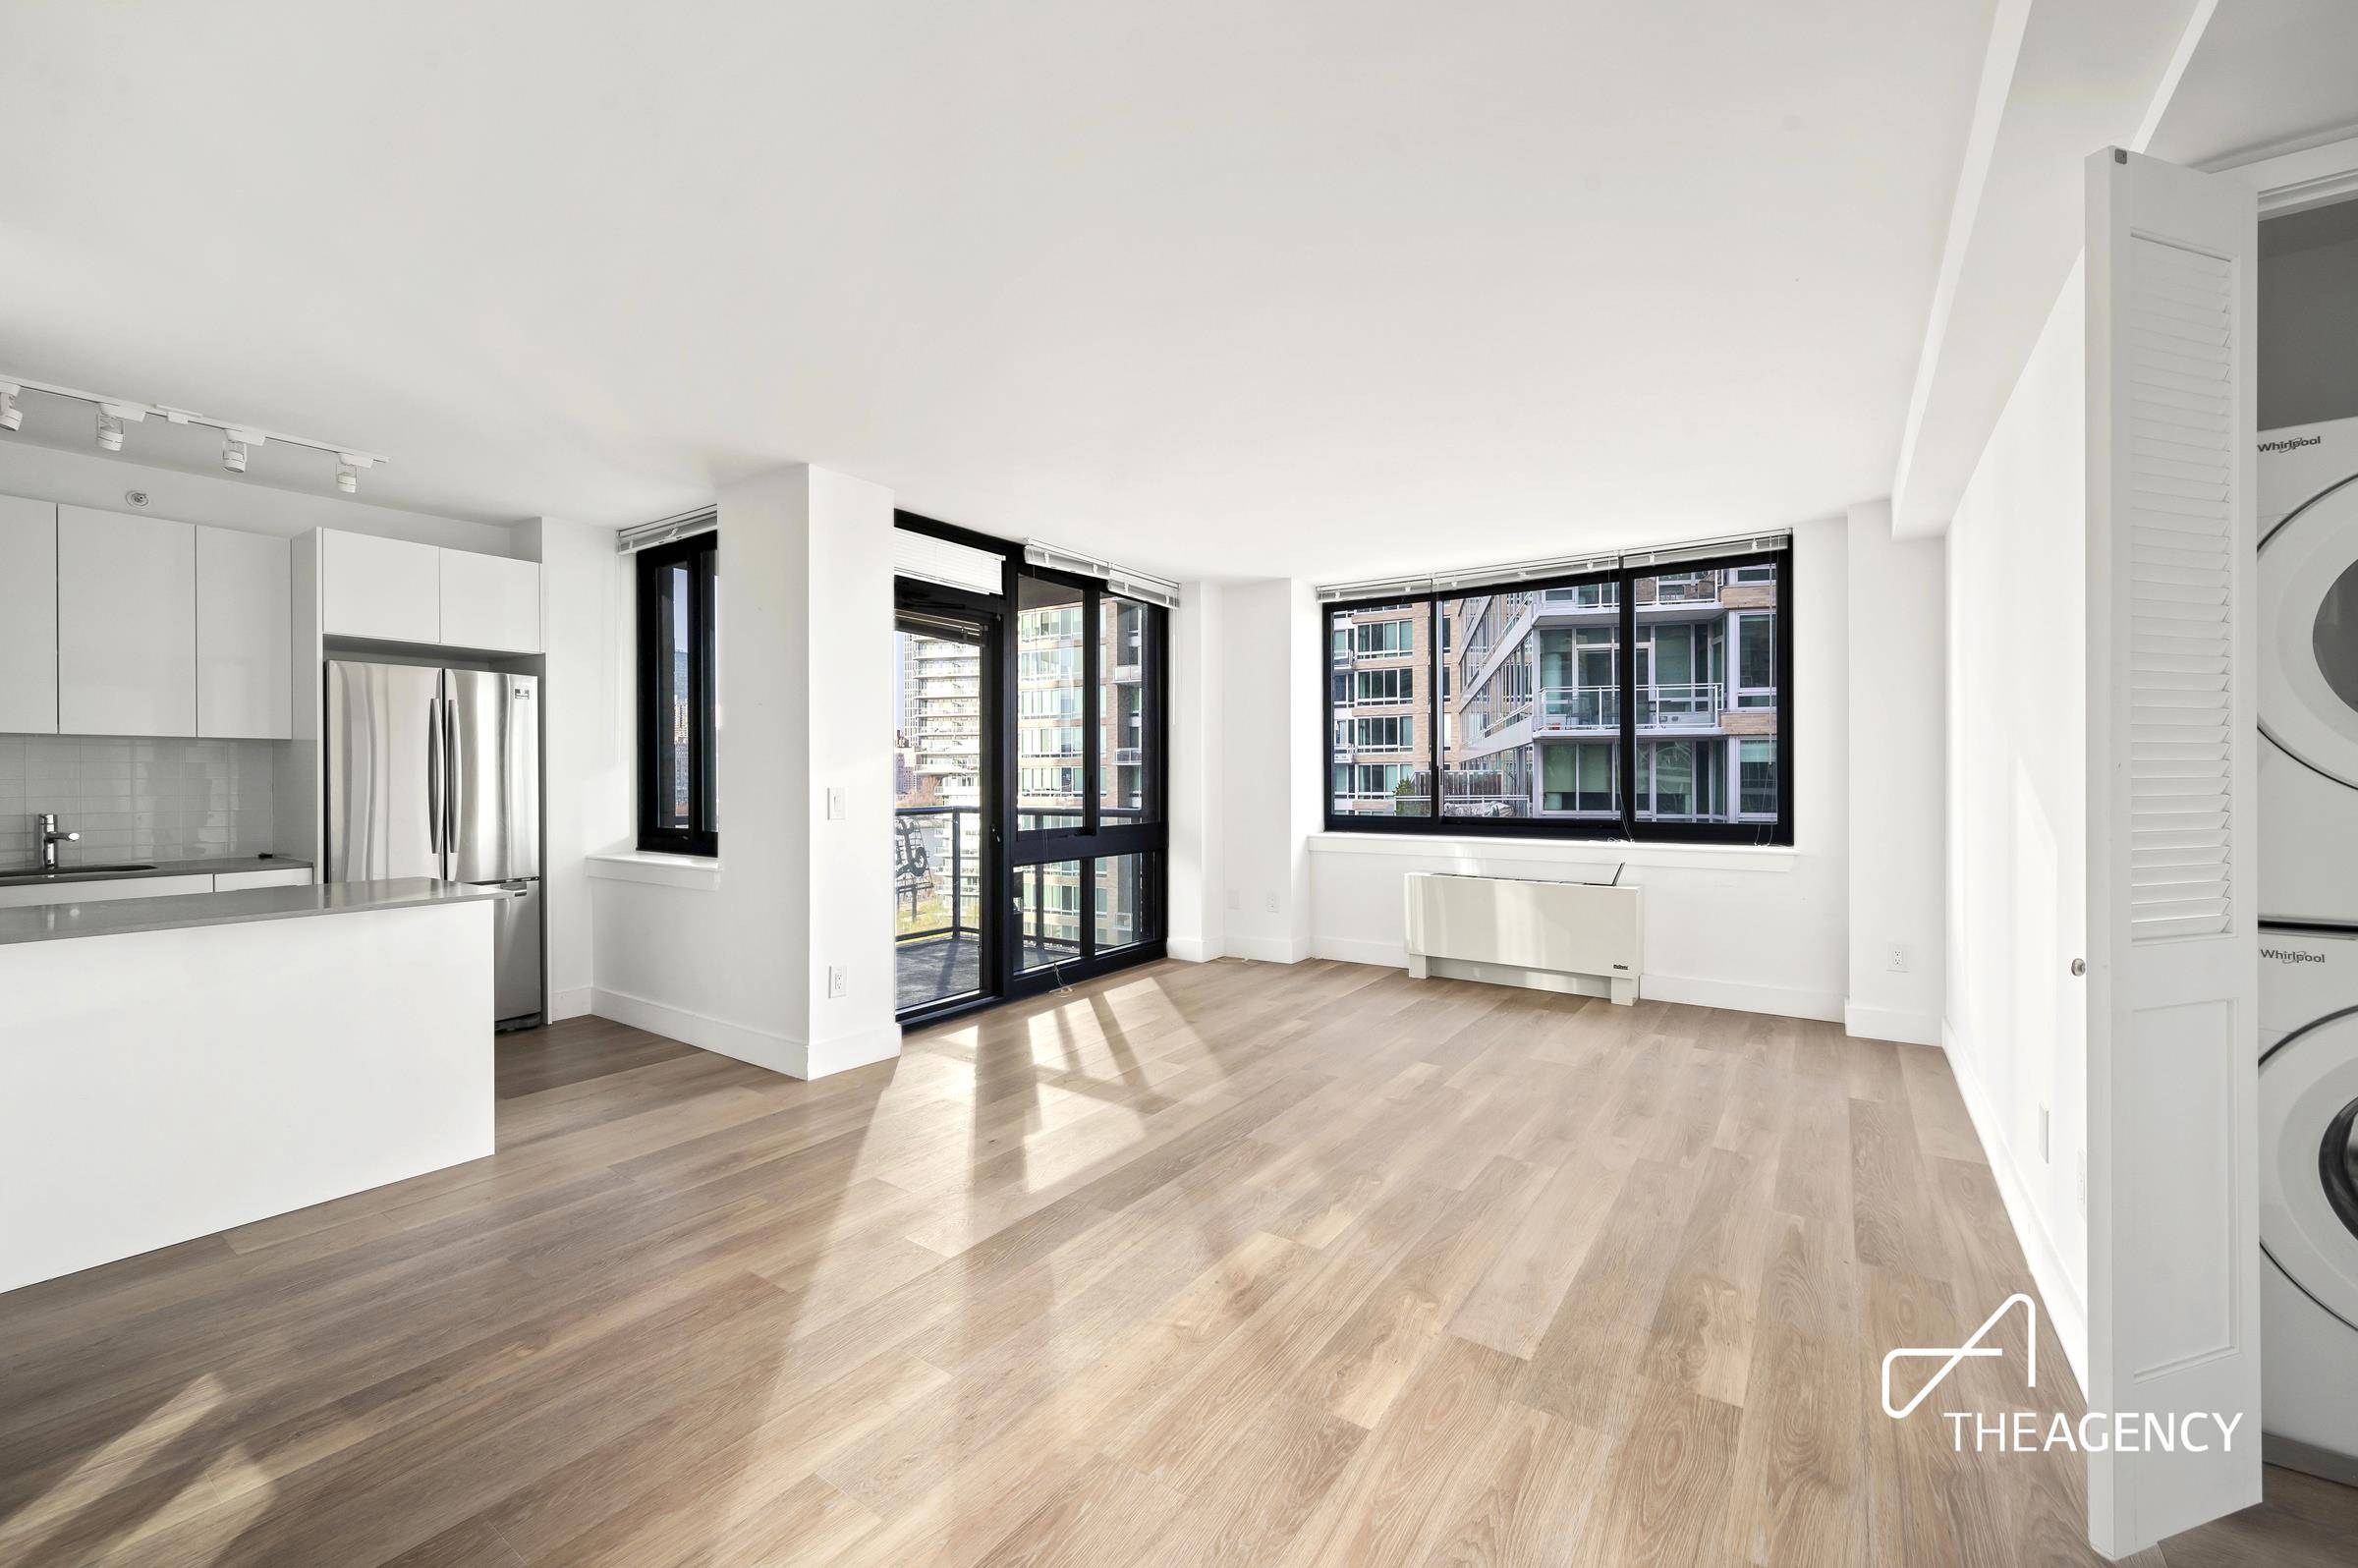 Lease Assignment through 4 30 2023 Renewal Price 5, 650Welcome home to this beautiful, newly renovated corner two bedroom two bathroom apartment in a full service doorman building.